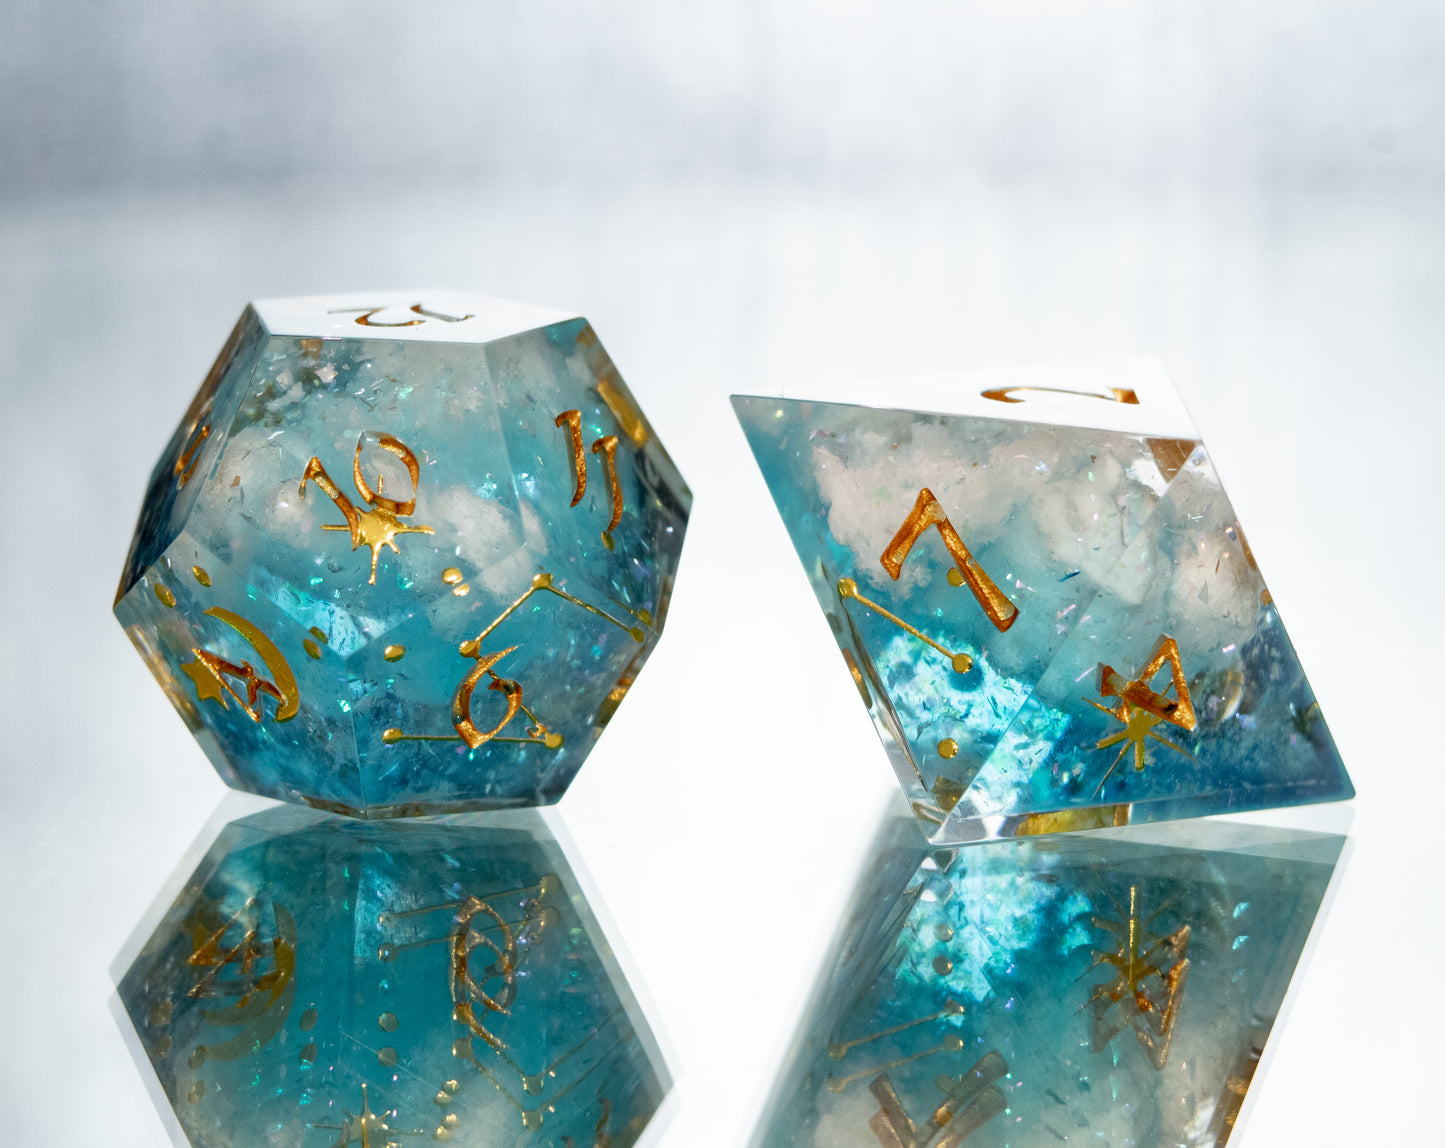 Twinkle in the Clouds - 7 Piece Handmade Resin Dice